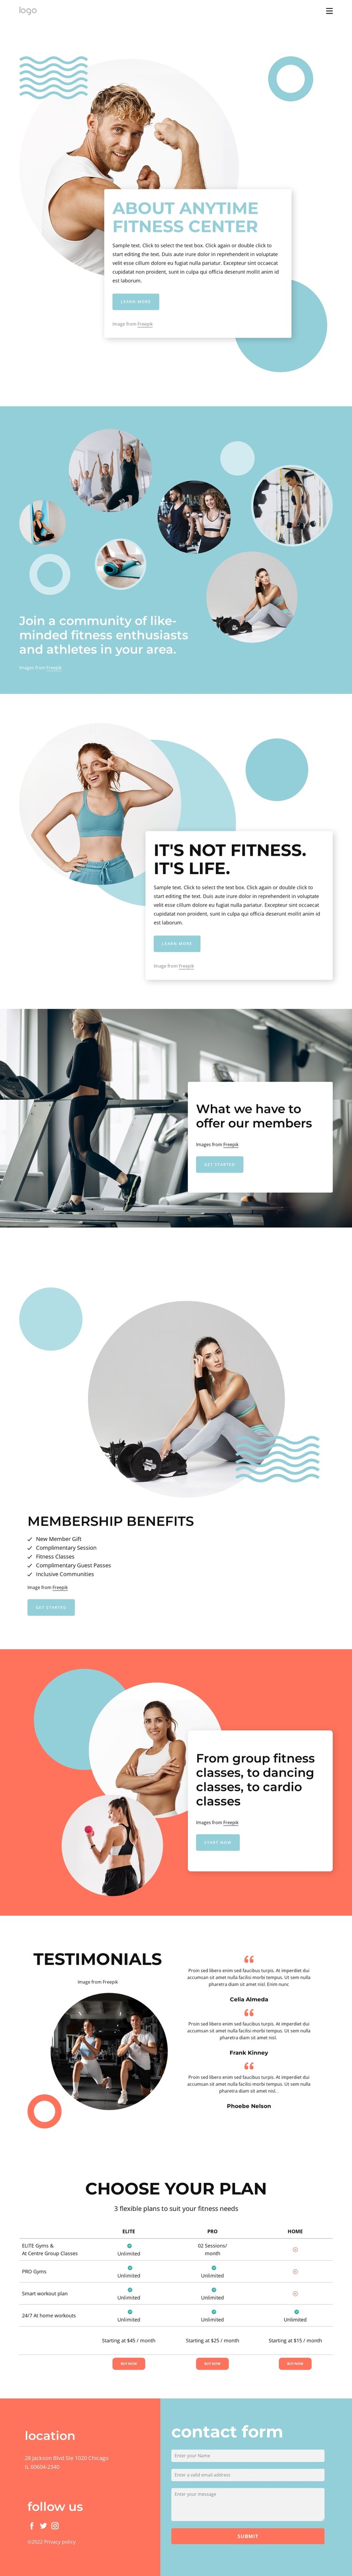 About Anytime fitness center CSS Template